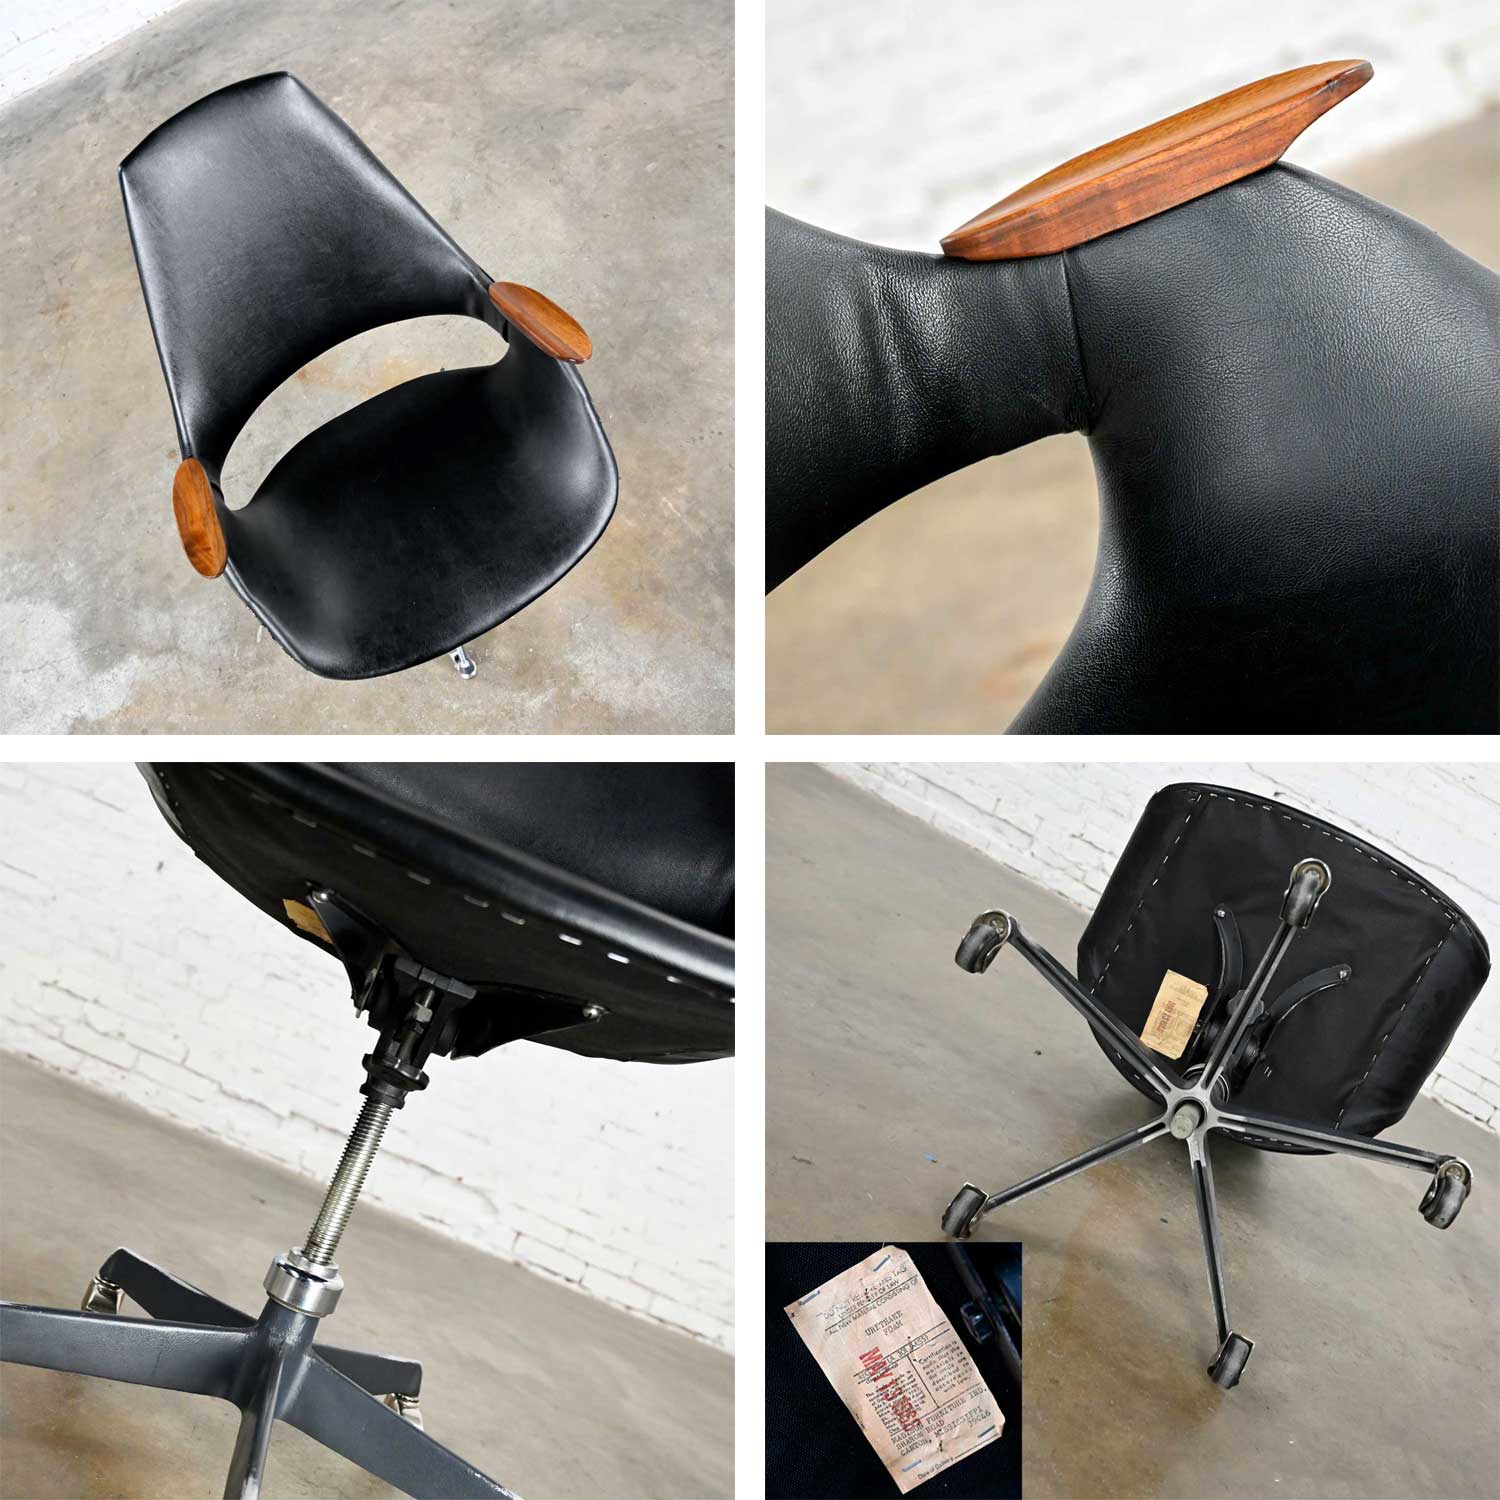 Vintage MCM Space Age Black Vinyl Rolling Desk Chair Wood Arms & Five Prong Base by Arthur Umanoff for Madison Furniture